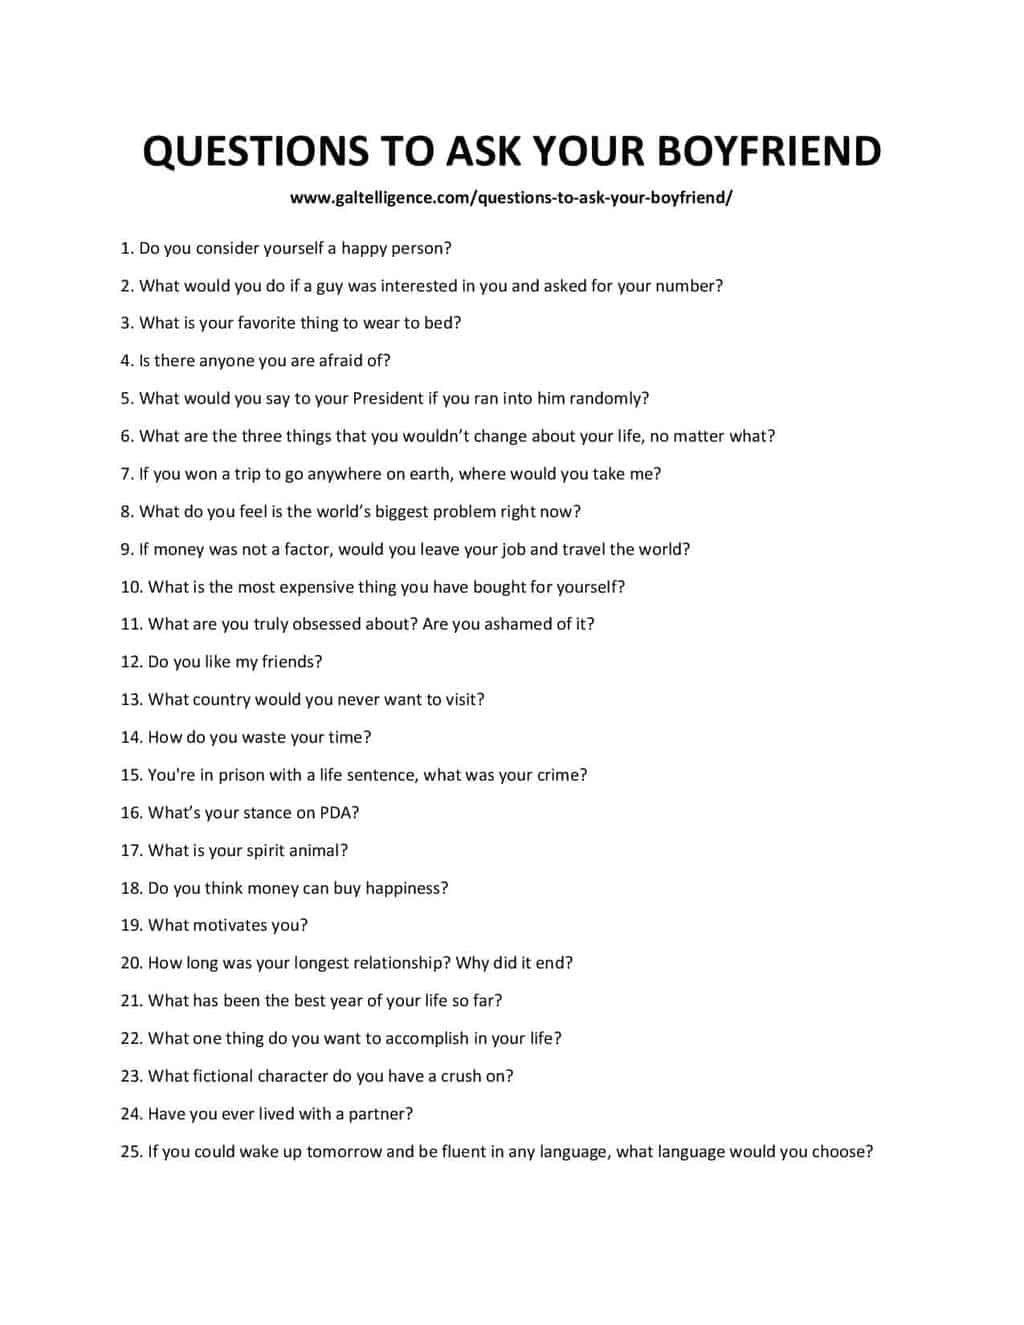 QUESTIONS TO ASK YOUR BOYFRIEND Page 001 